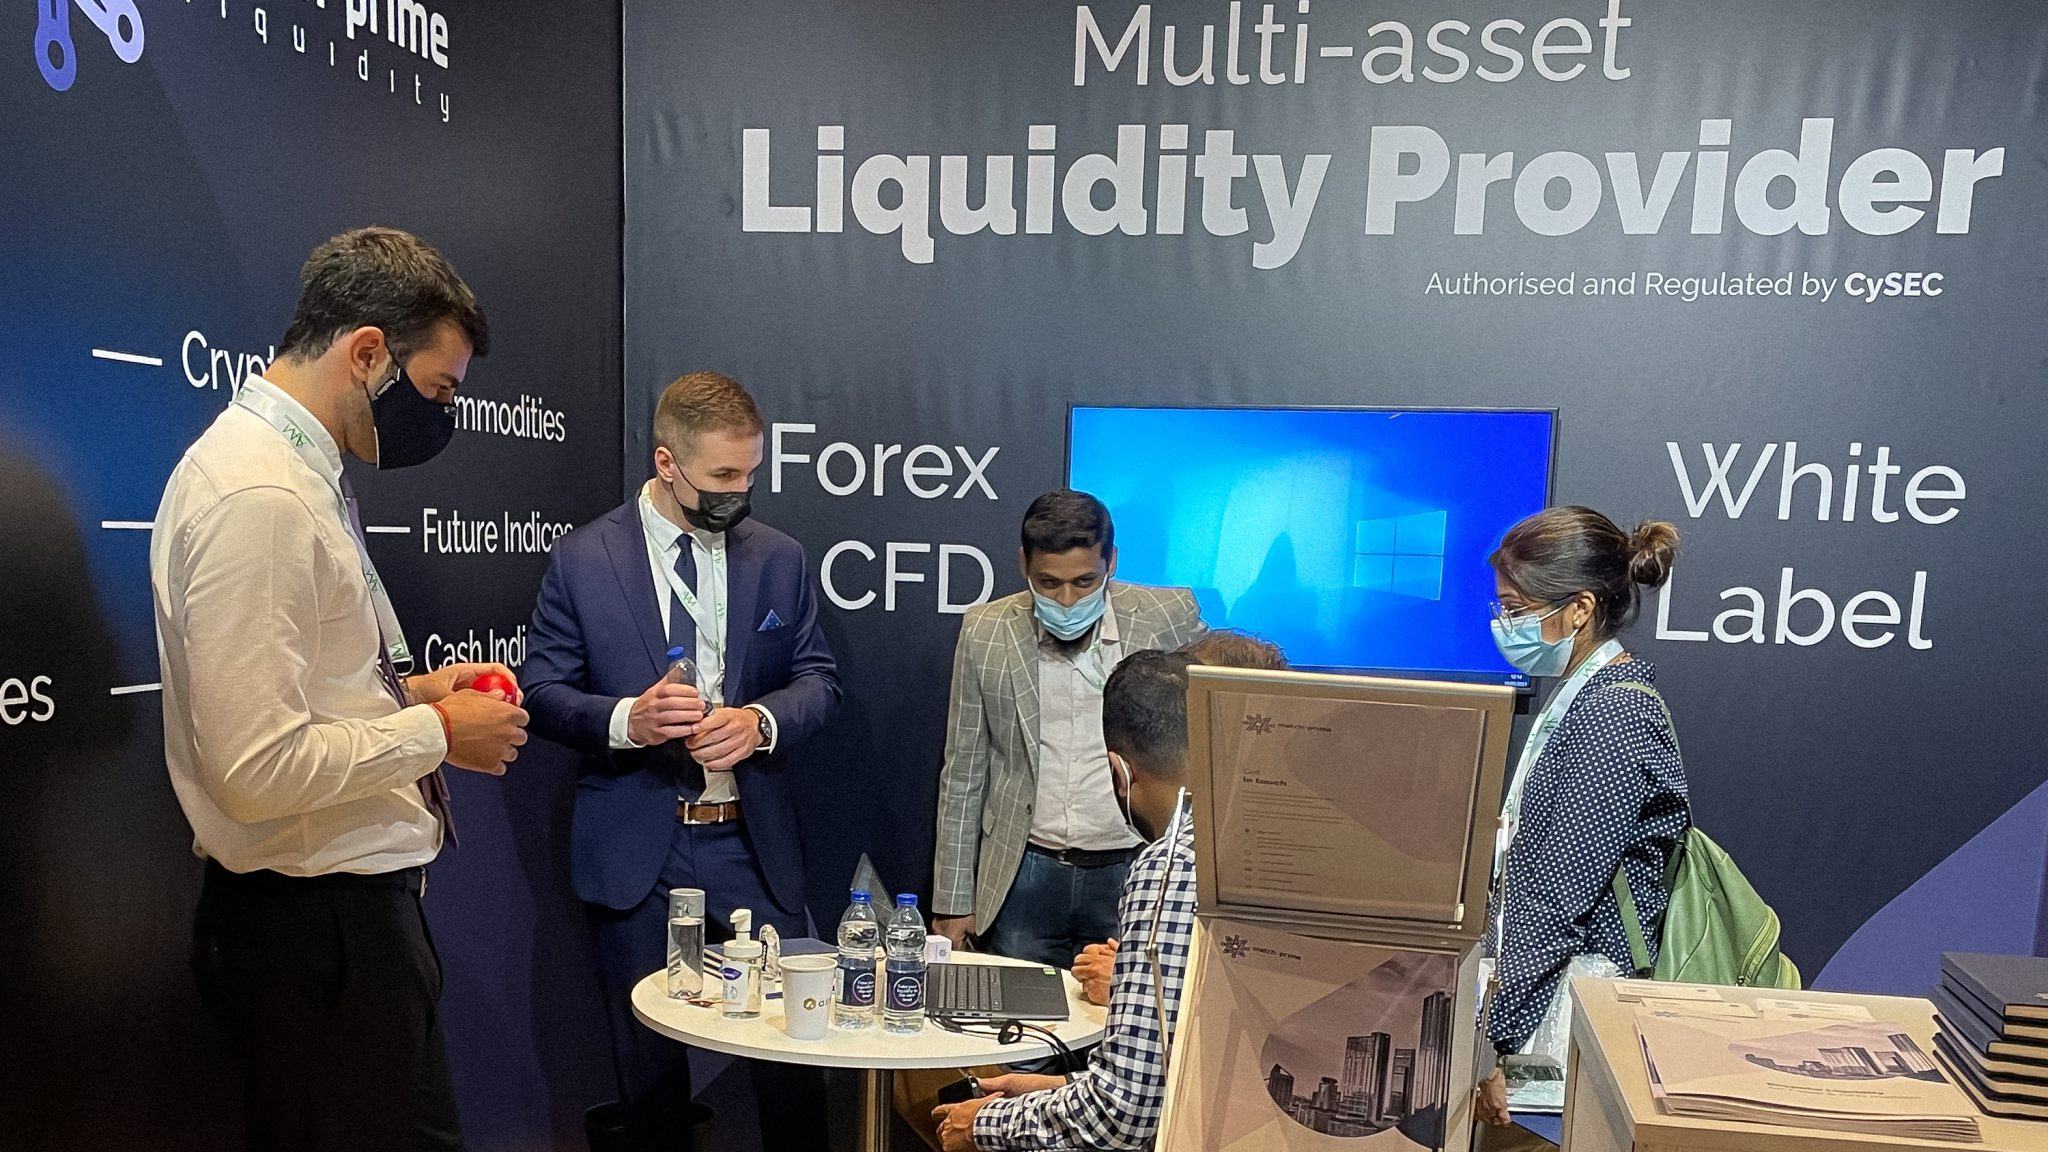 Match-Prime | Regulated Liquidity Provider for Forex & CFD